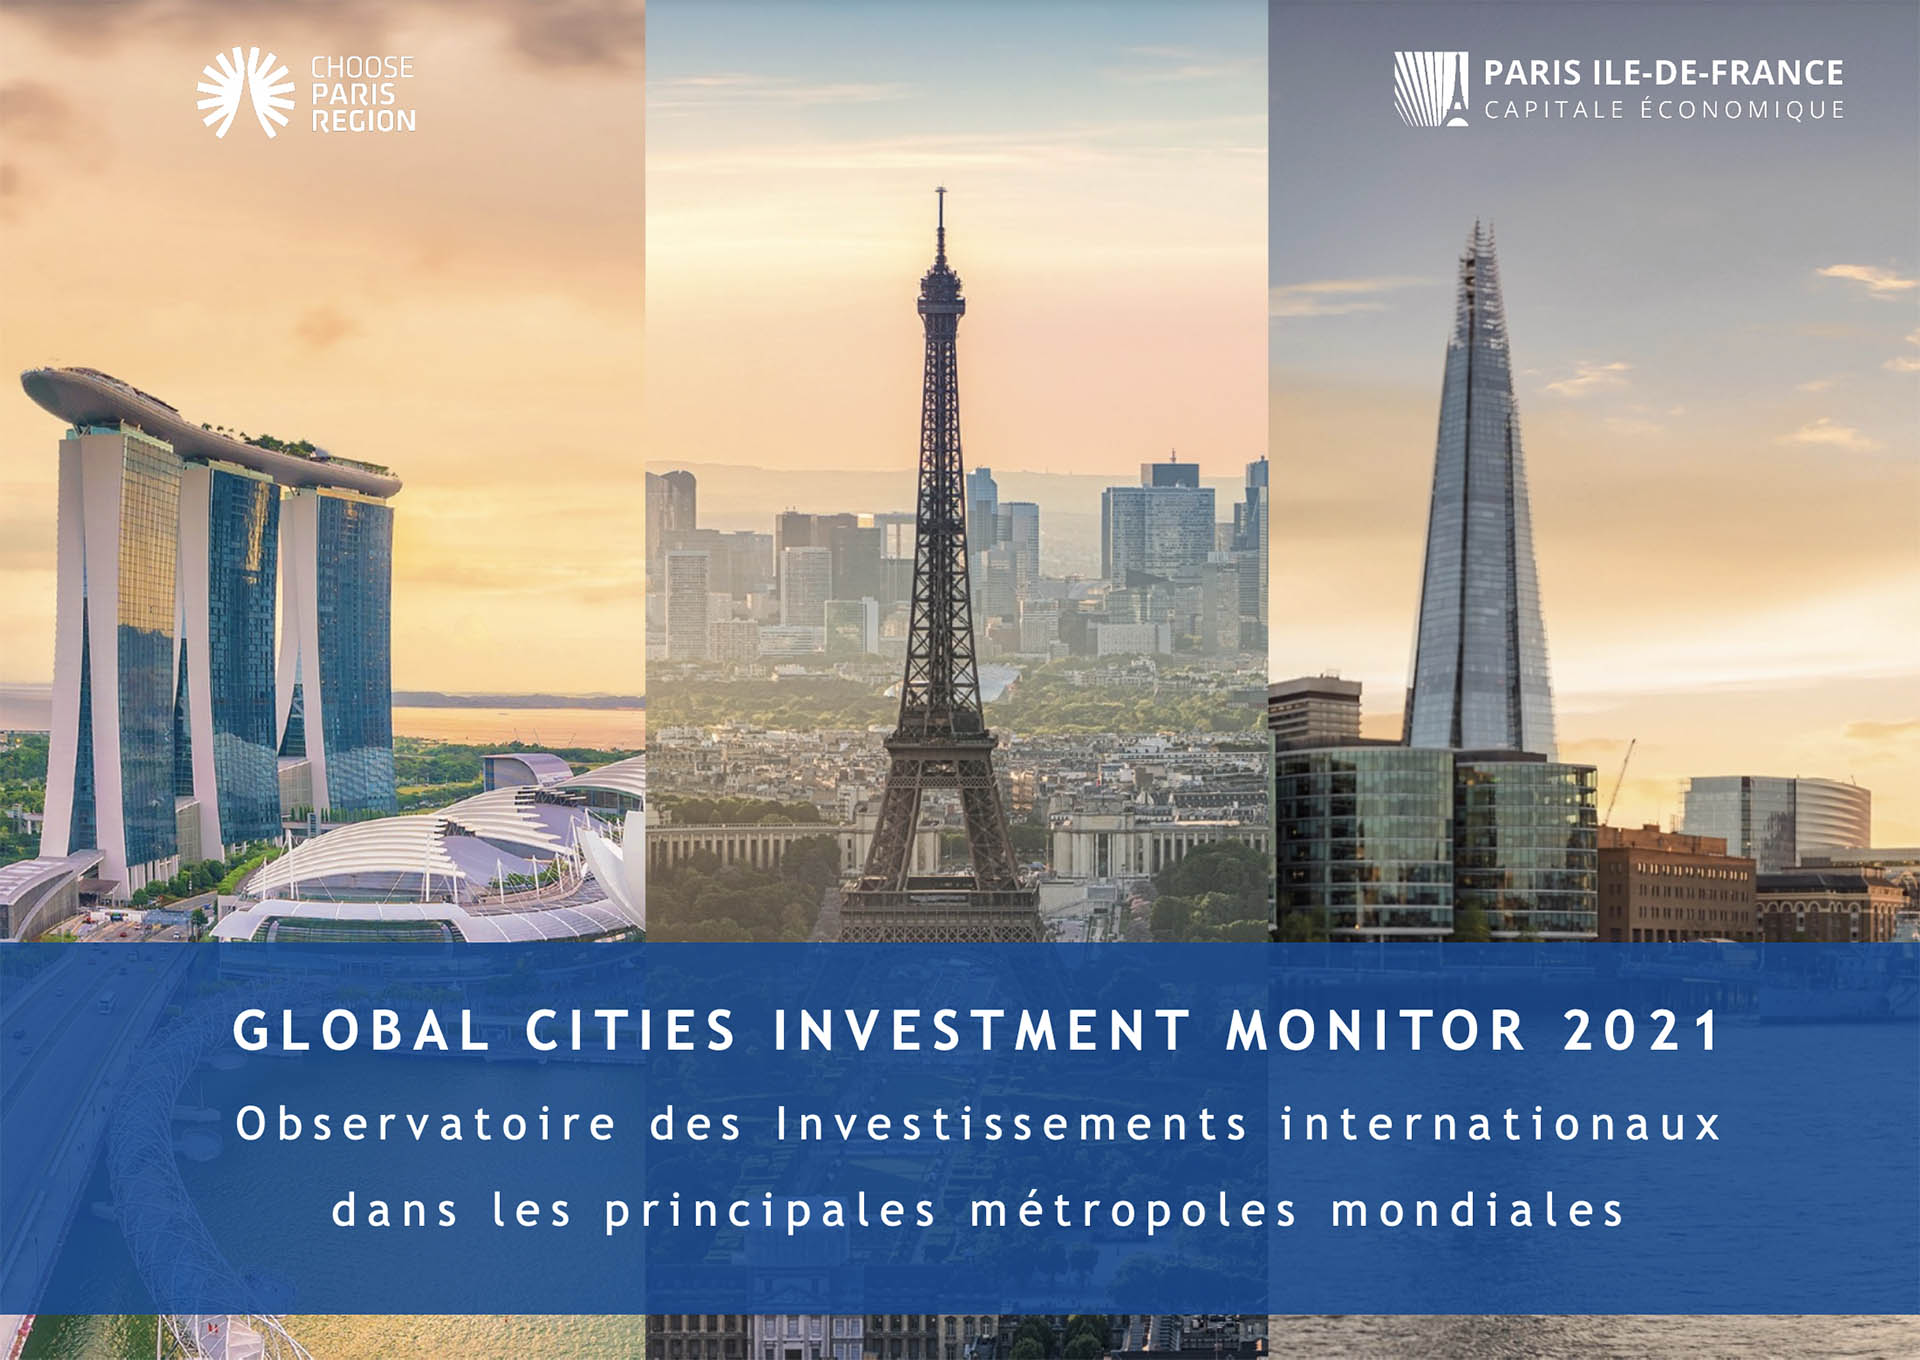 Global Cities Investment Monitor 2021